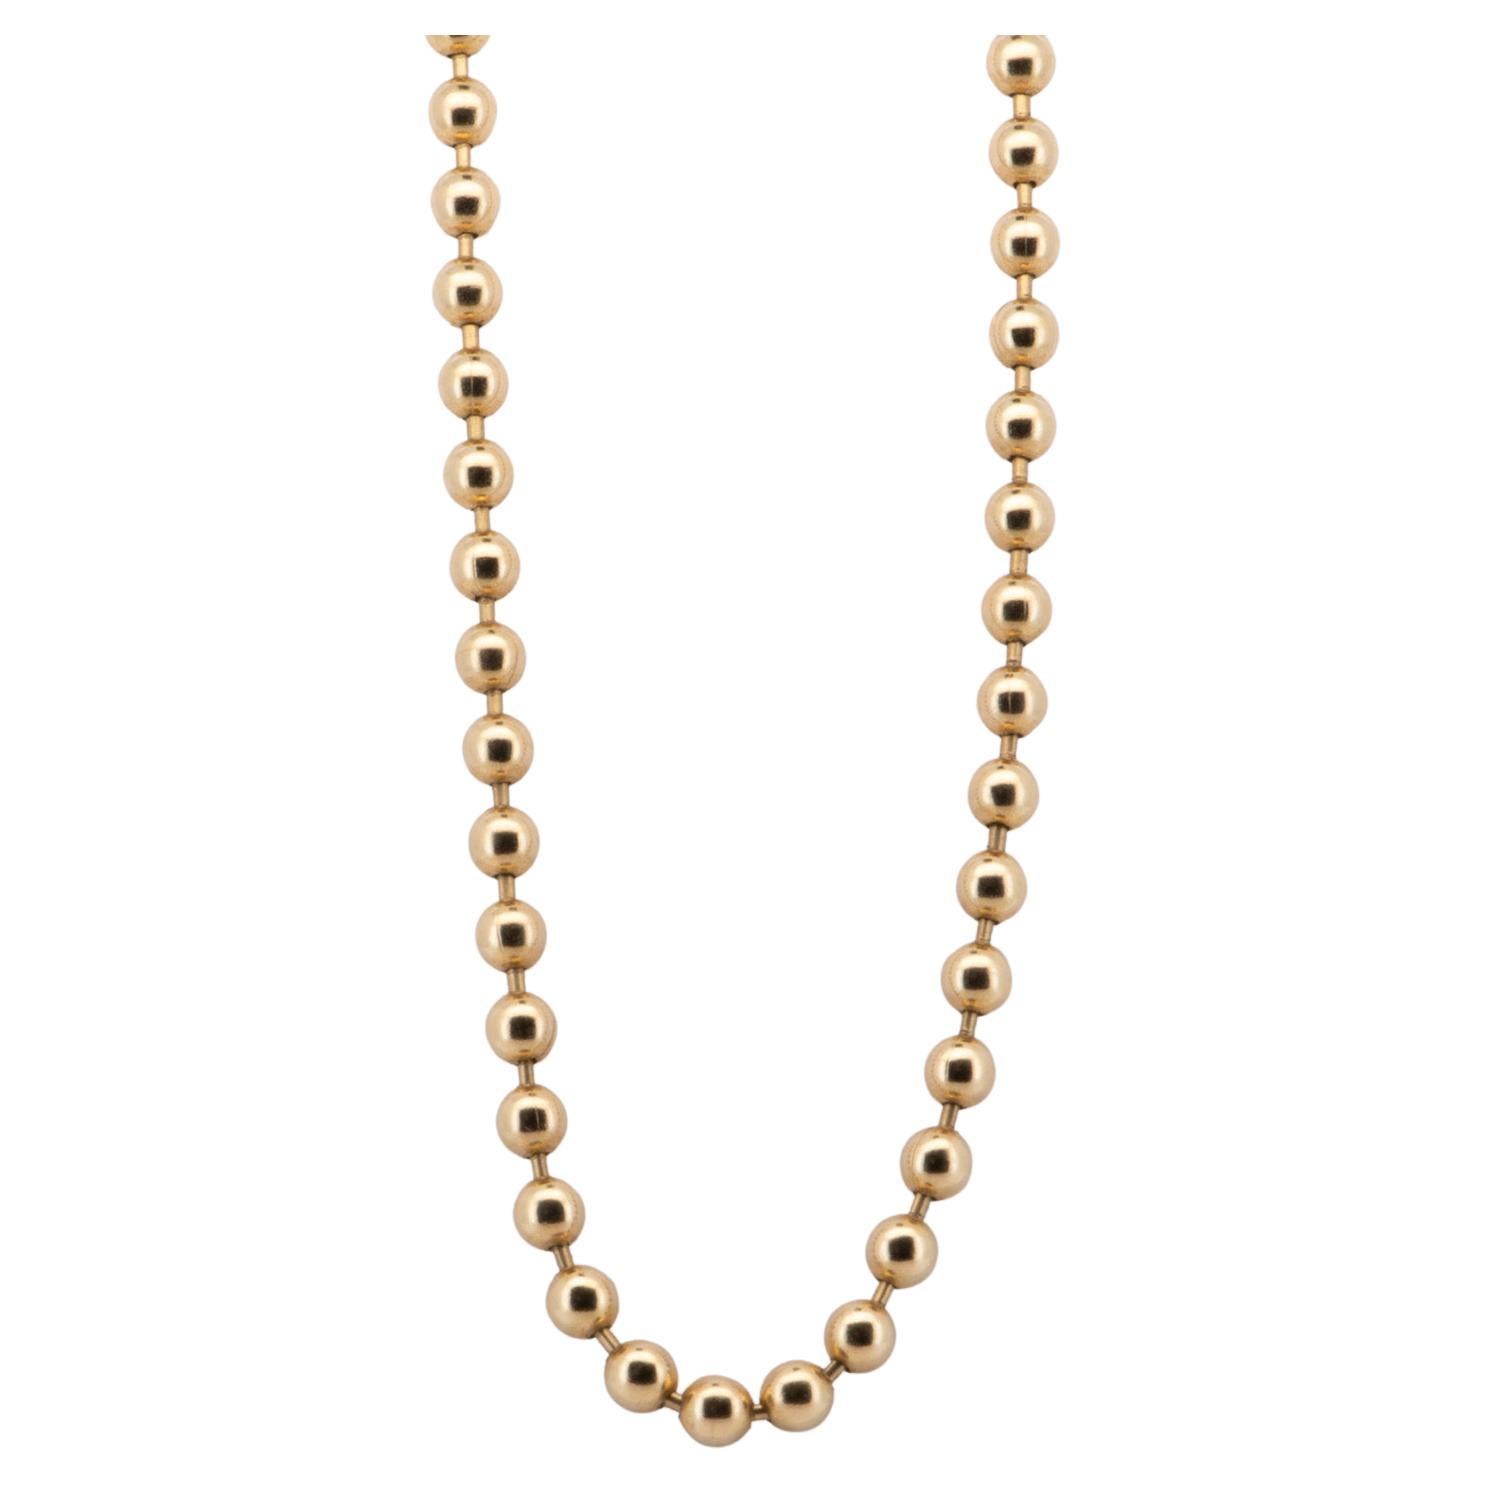 3mm Bead Necklace Chain 18K Gold 20" Heavy 14g+ Trendy Layered Look Beaded For Sale